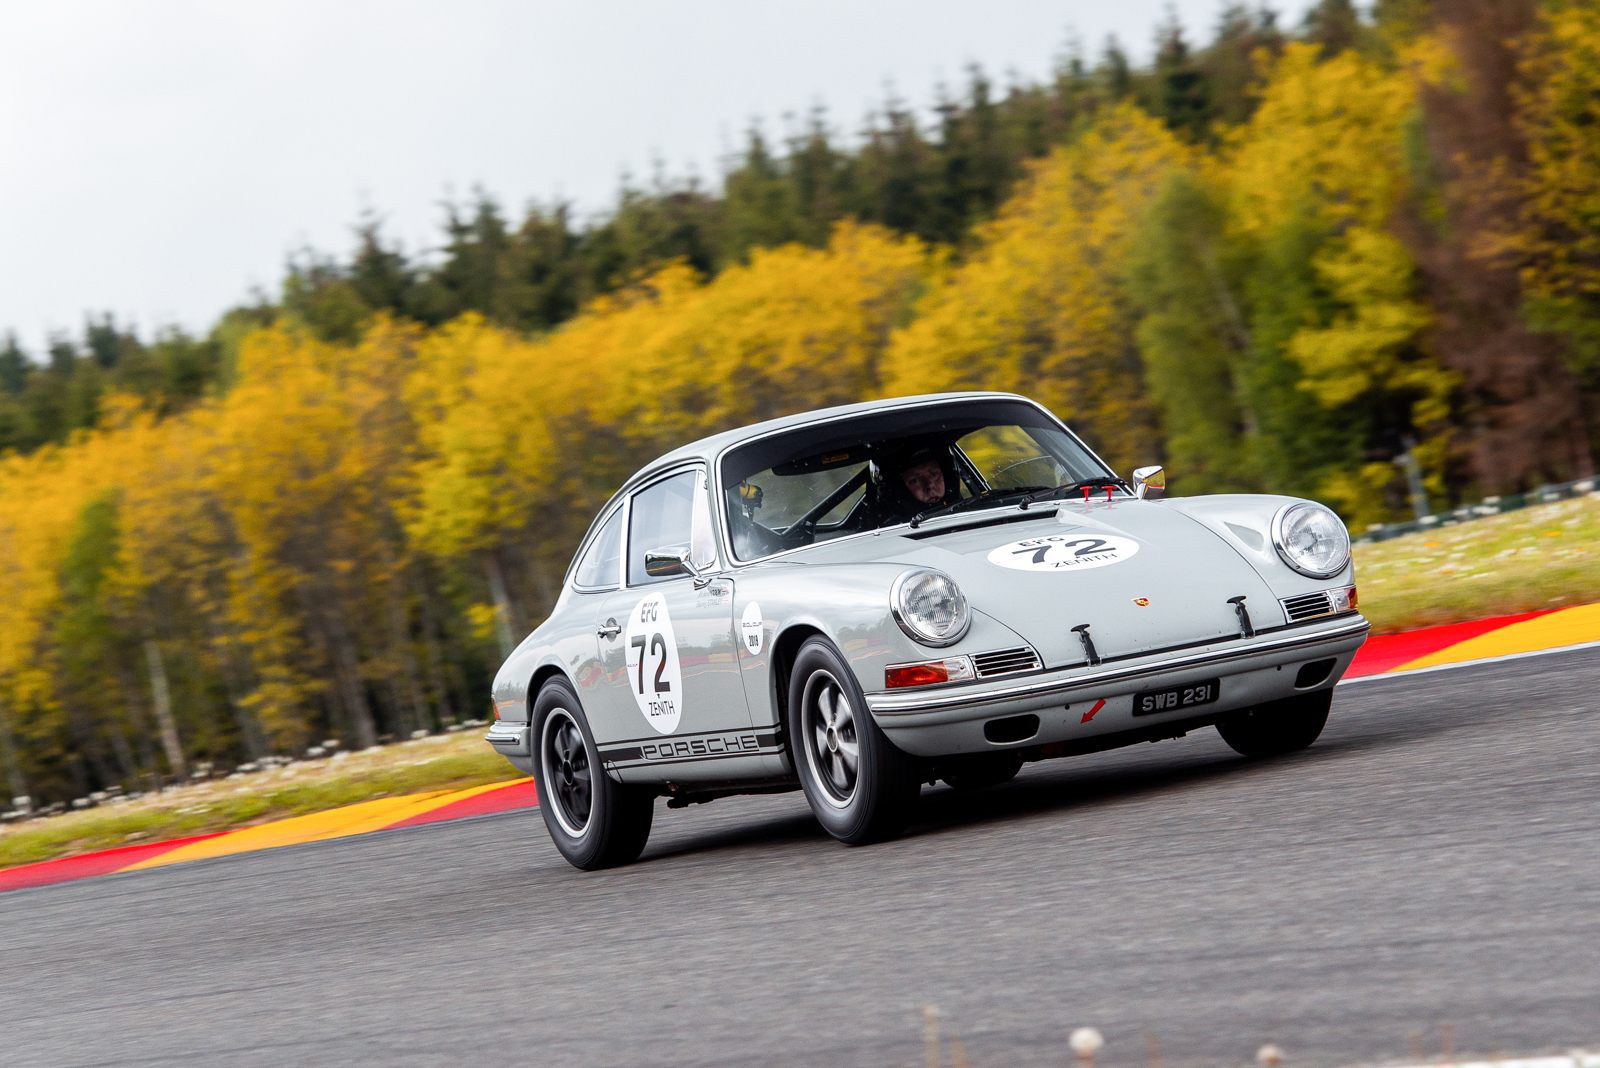 Tuthill 2-litre 911s charge hard at Spa